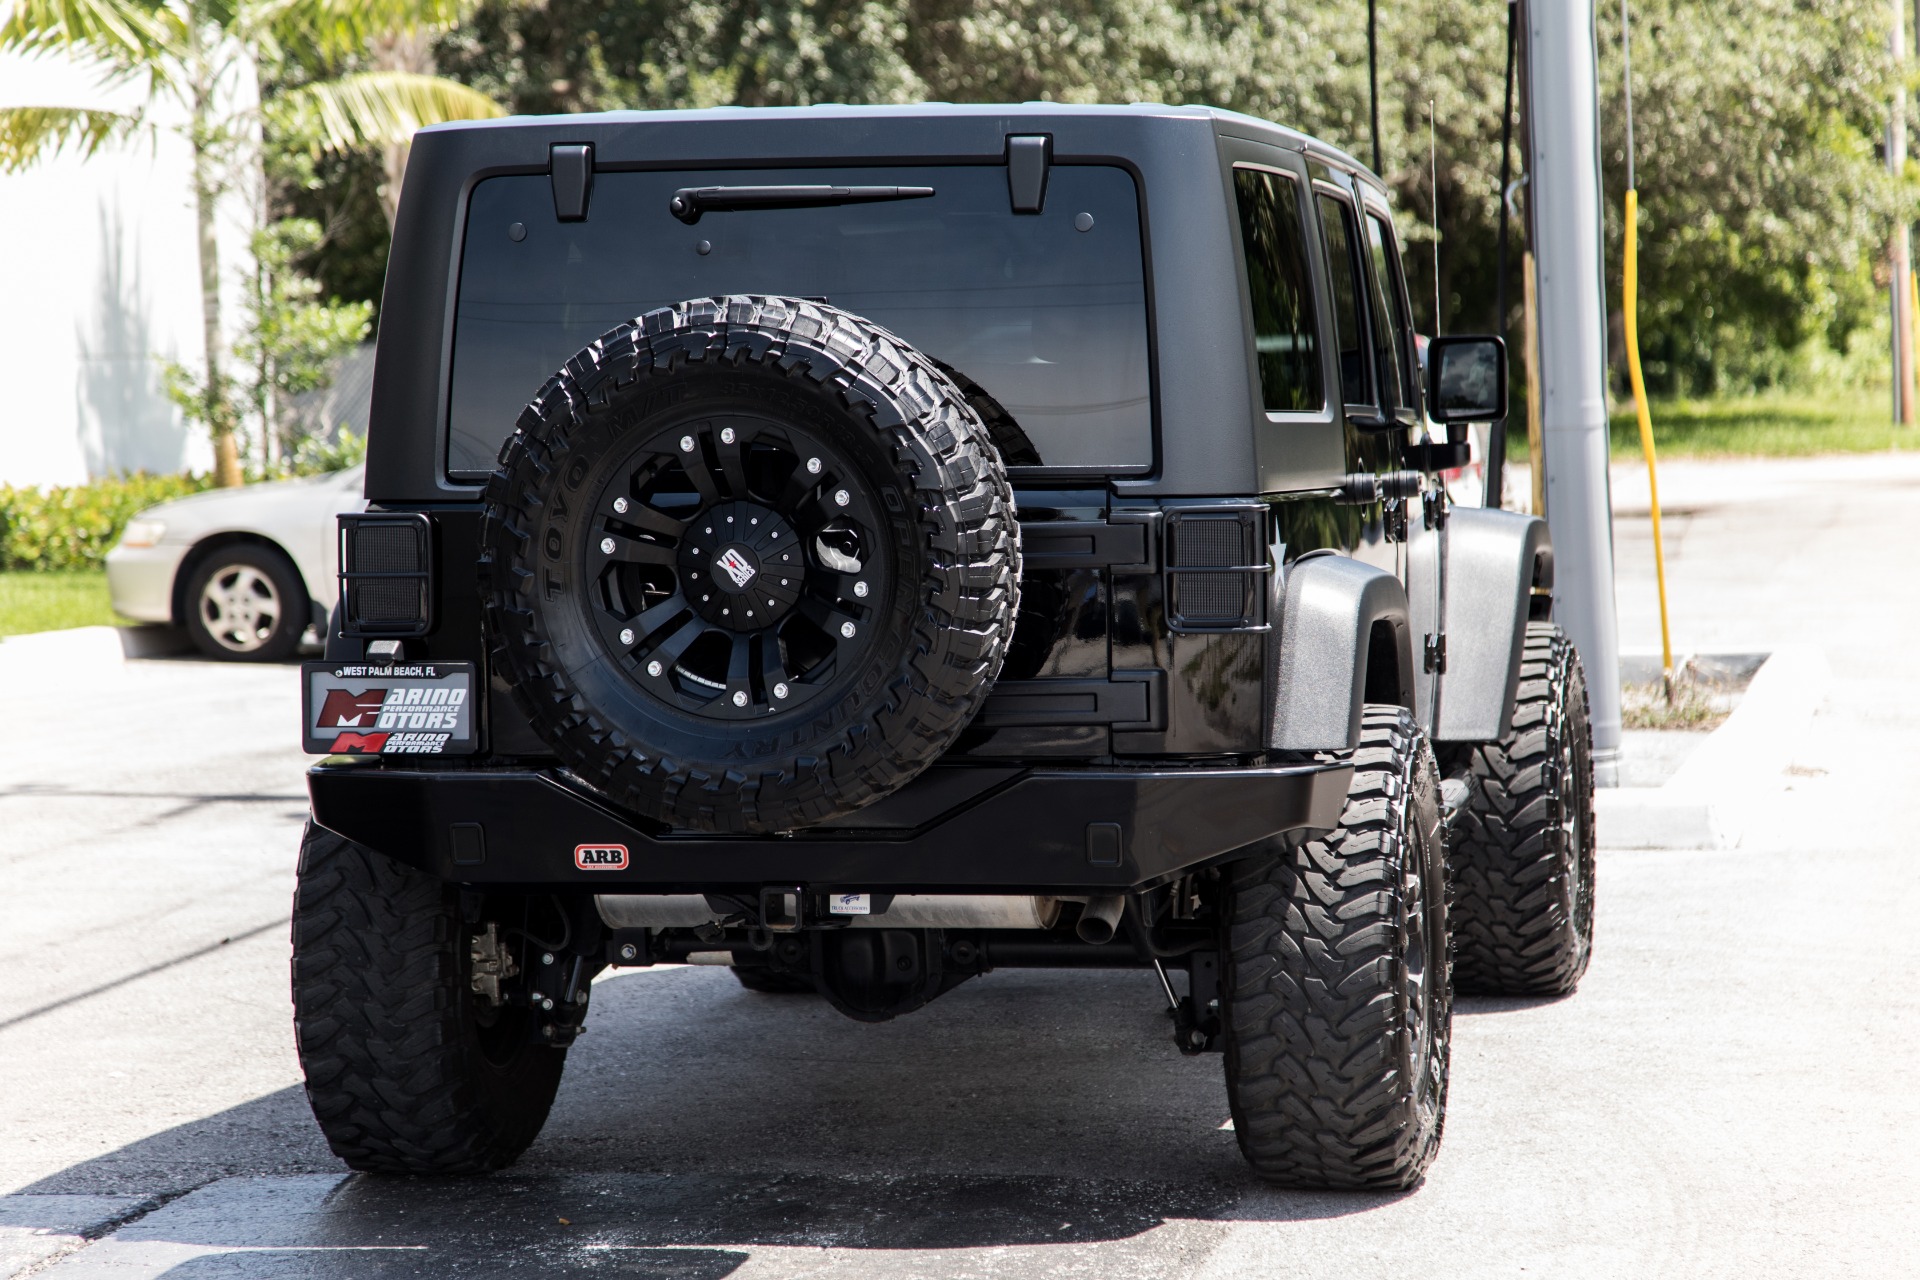 Used 2011 Jeep Wrangler Unlimited Rubicon Black Ops Edition For Sale  ($34,900) | Marino Performance Motors Stock #570365